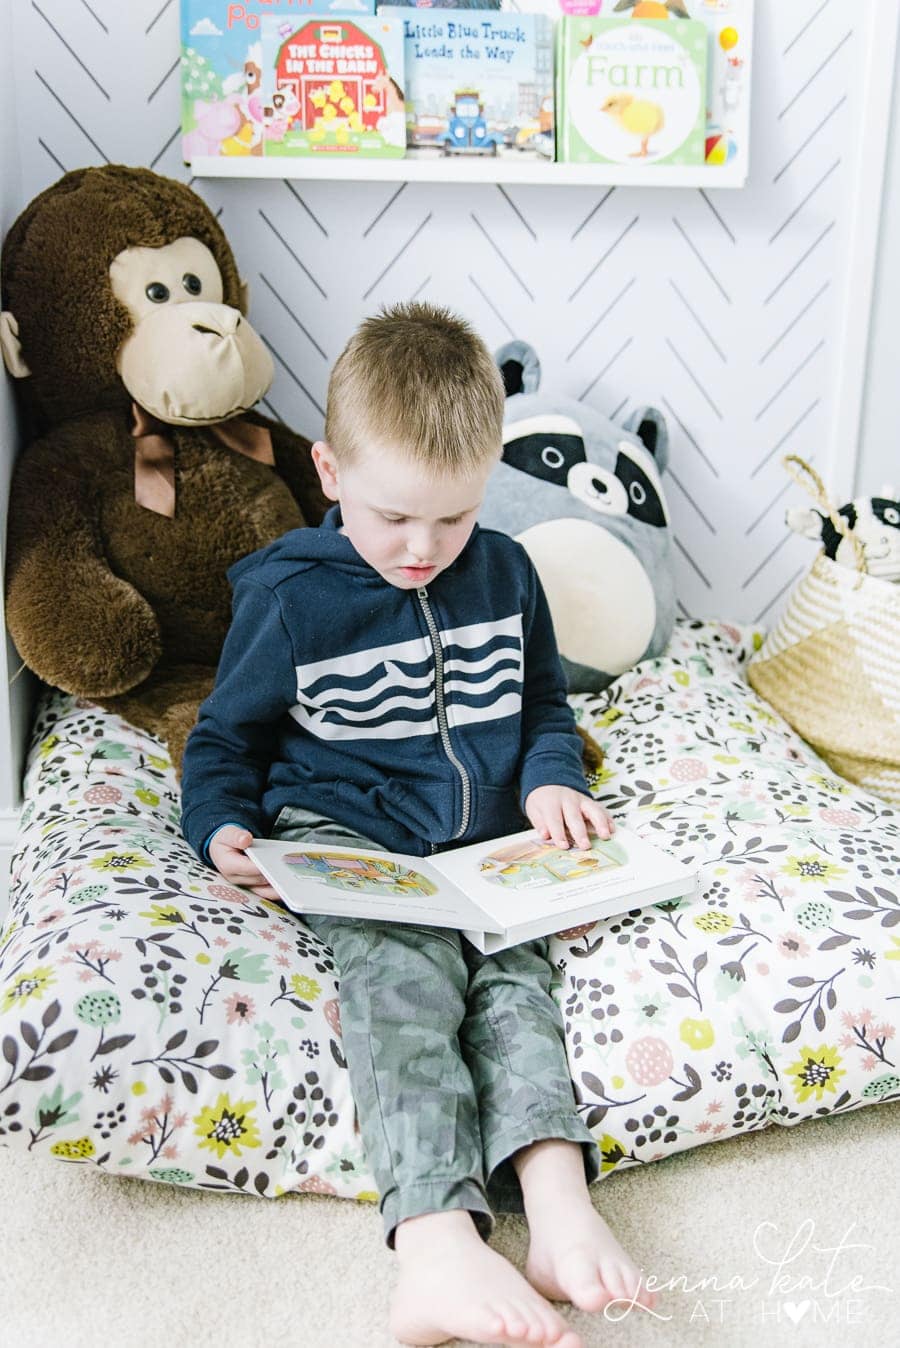 Reading corner ideas for a toddler